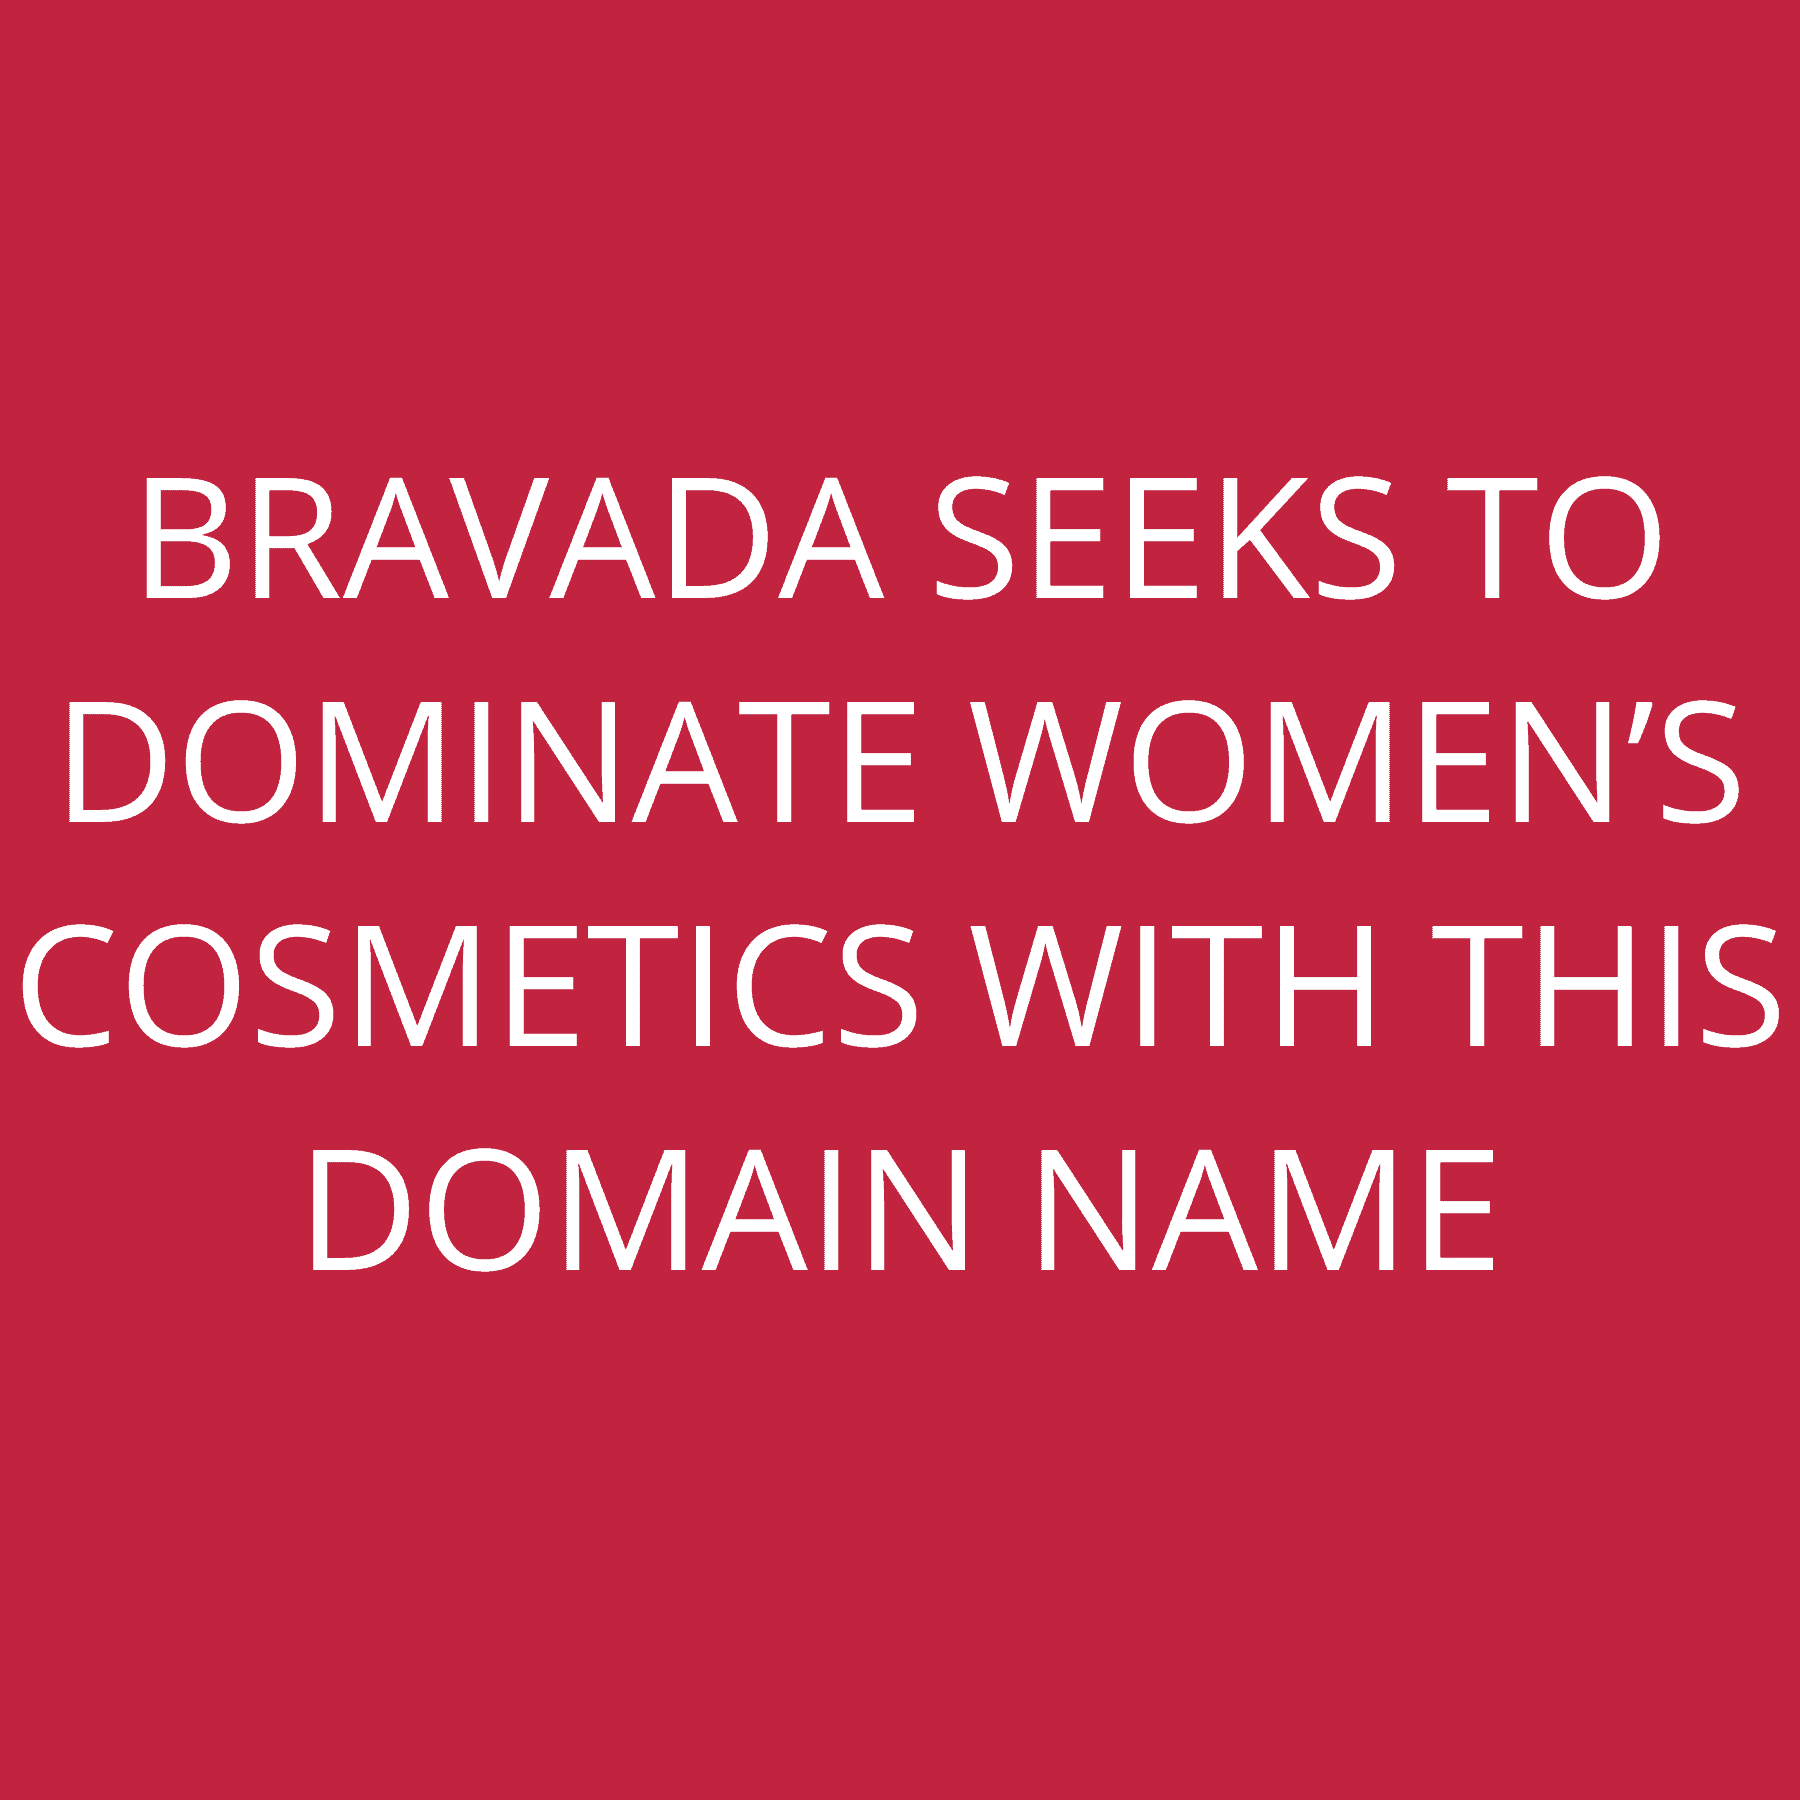 BRAVADA seeks to dominate Women’s Cosmetics with this domain name